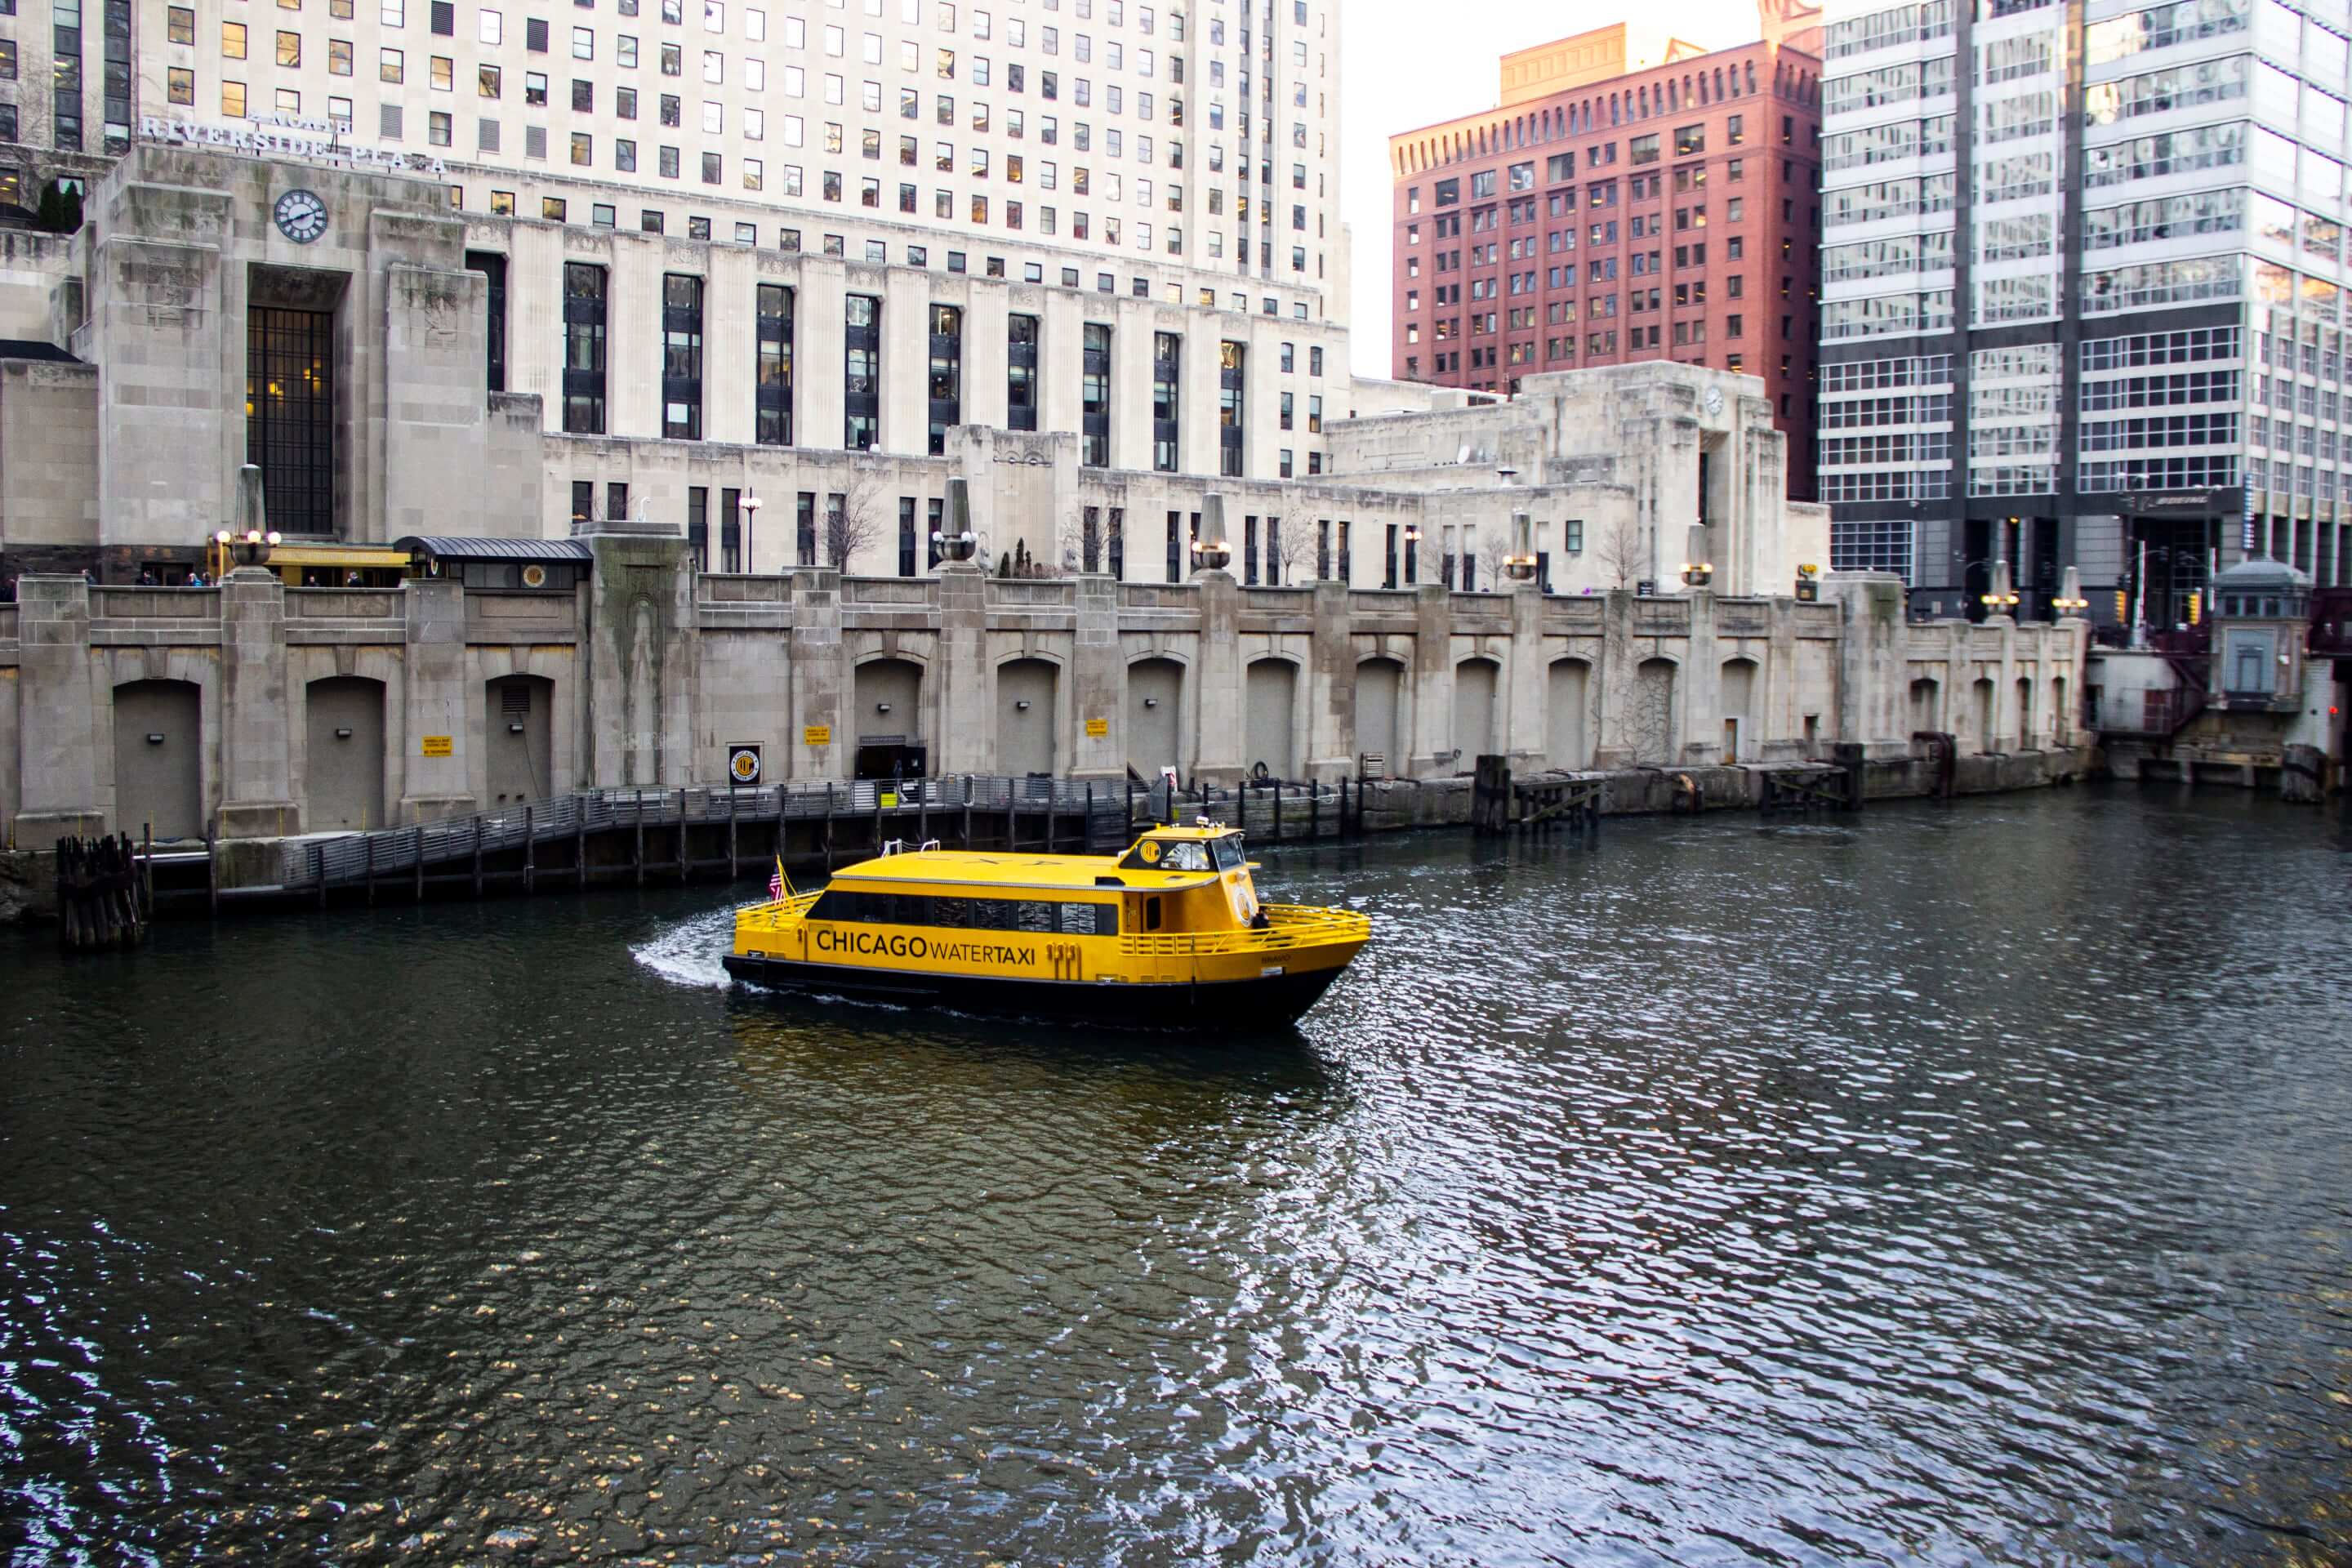 Ogilvie / Union (West Loop) Chicago Water Taxi